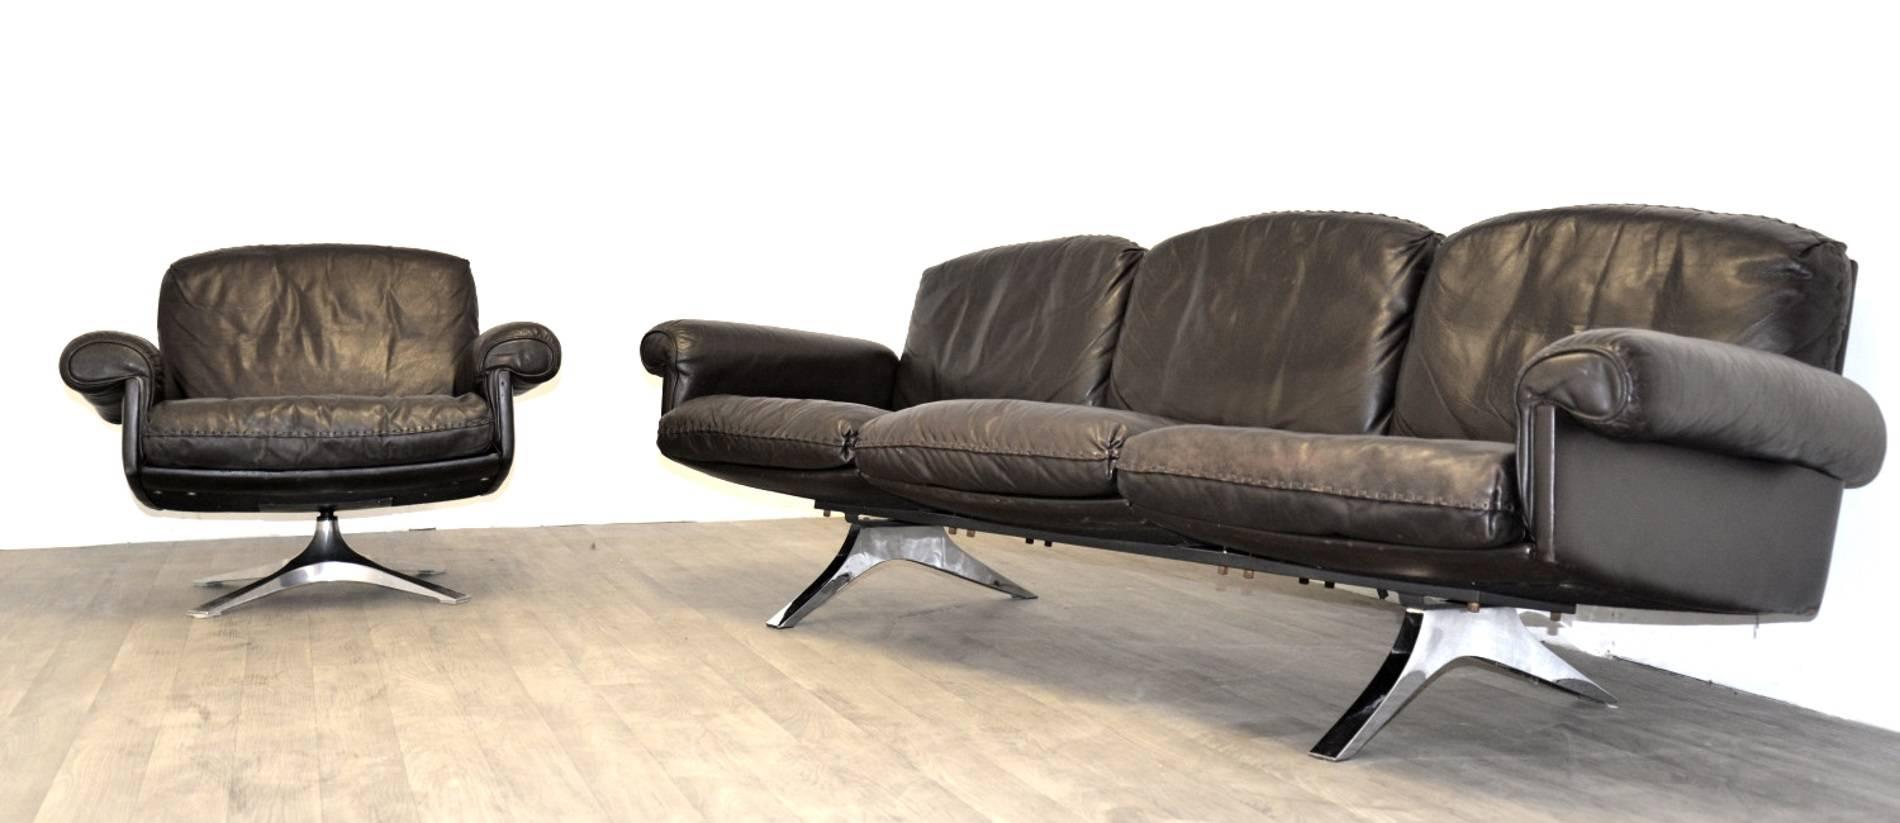 Discounted airfreight for our US and International customers ( from 2 weeks door to door)

We are delighted to bring to you a vintage de Sede DS 31 three-seater sofa and swivel lounge armchair. Built in the 1970s by de Sede craftsman from